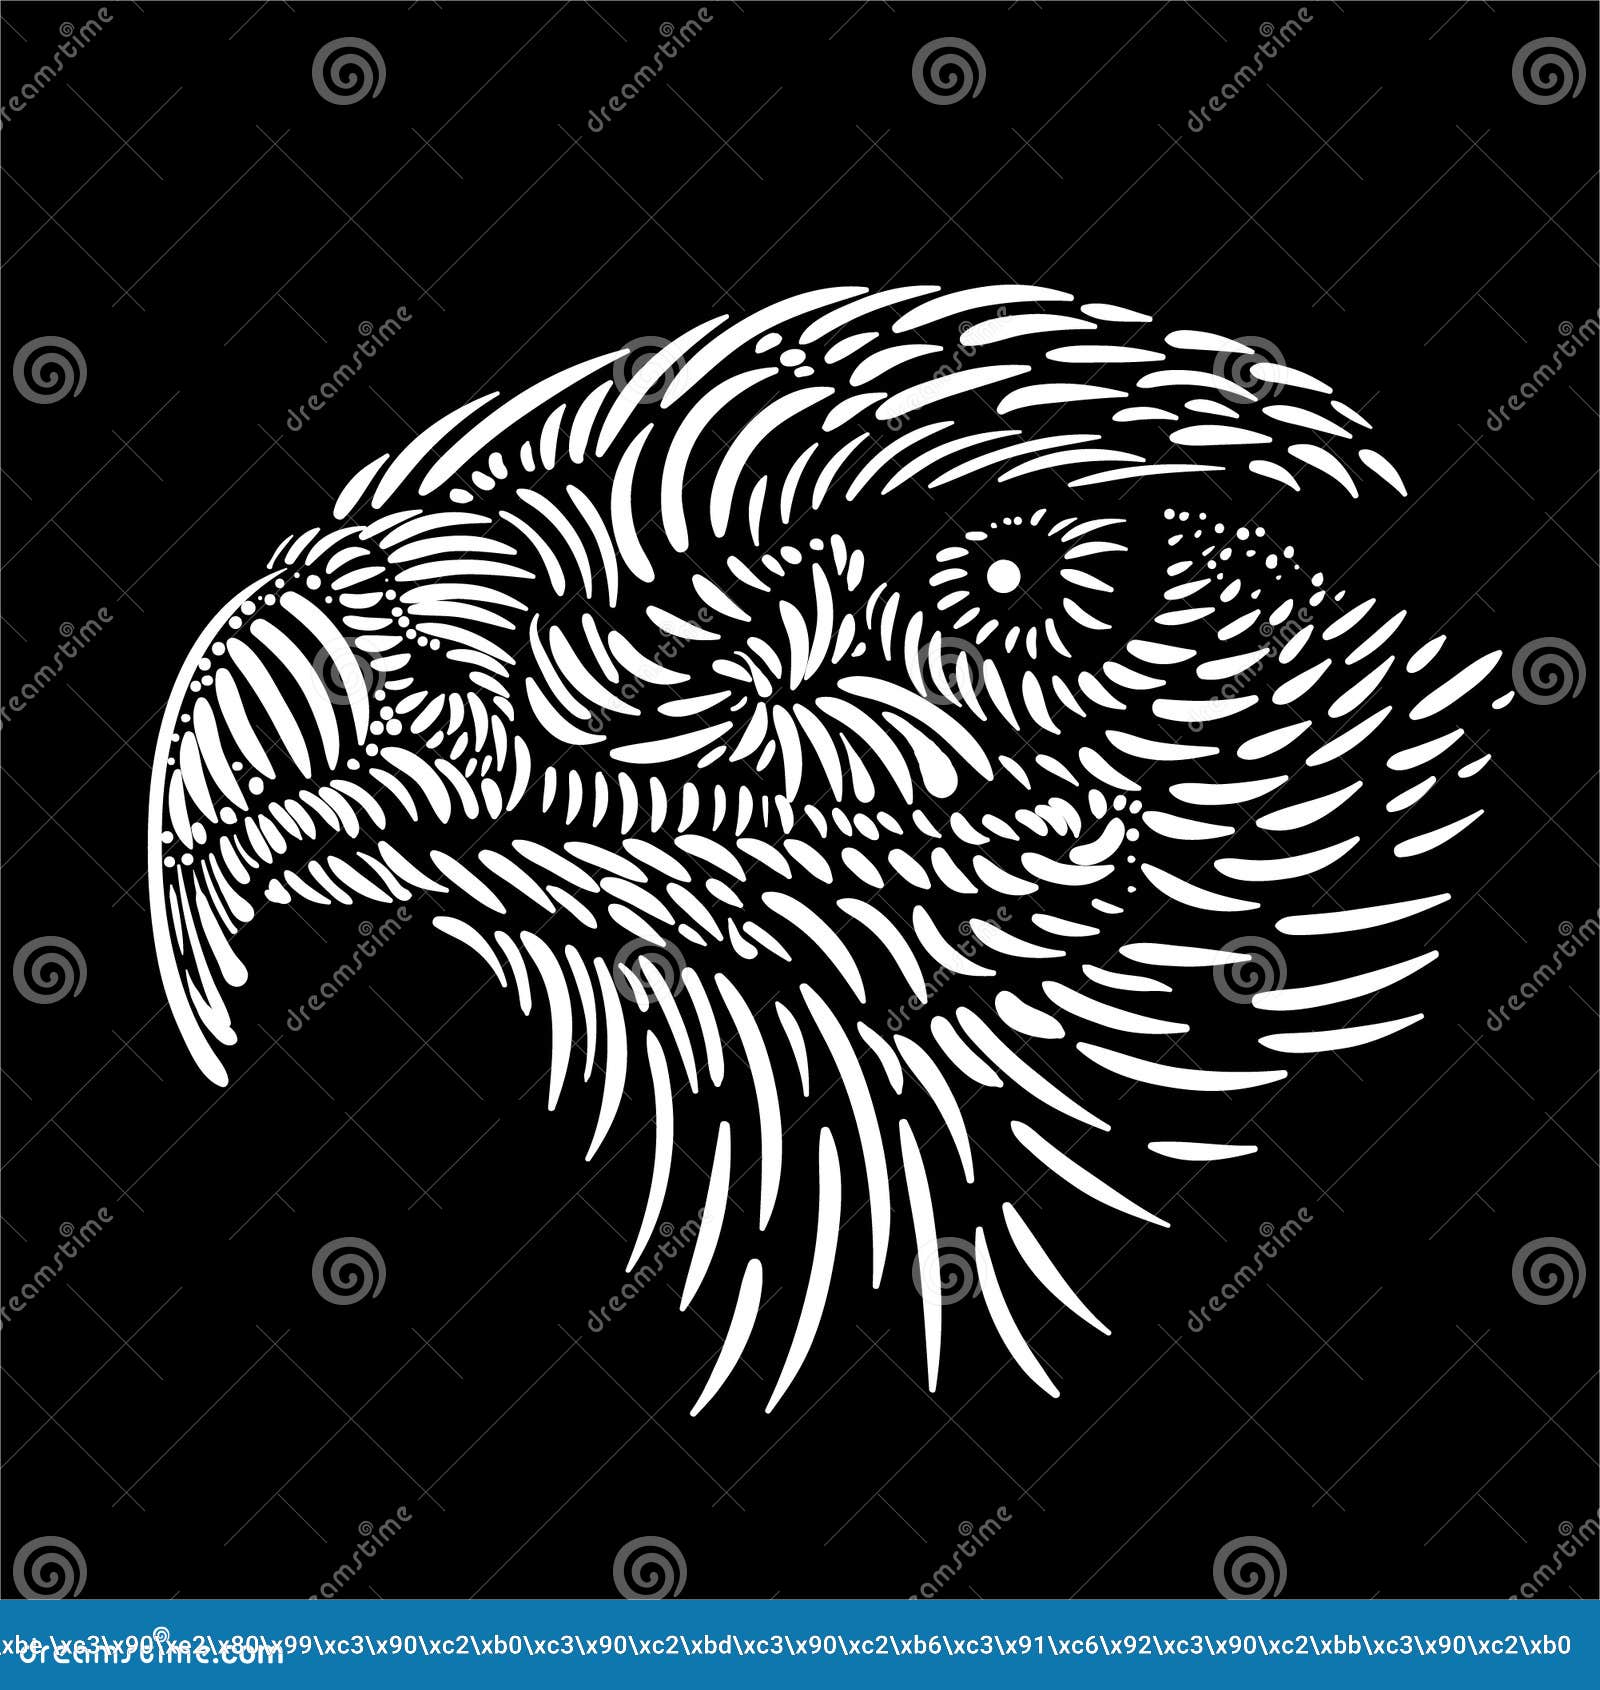 Sacred Hoops Empowering Youth With Team Basketball  Falcon Tribal Tattoo  Designs  Free Transparent PNG Clipart Images Download